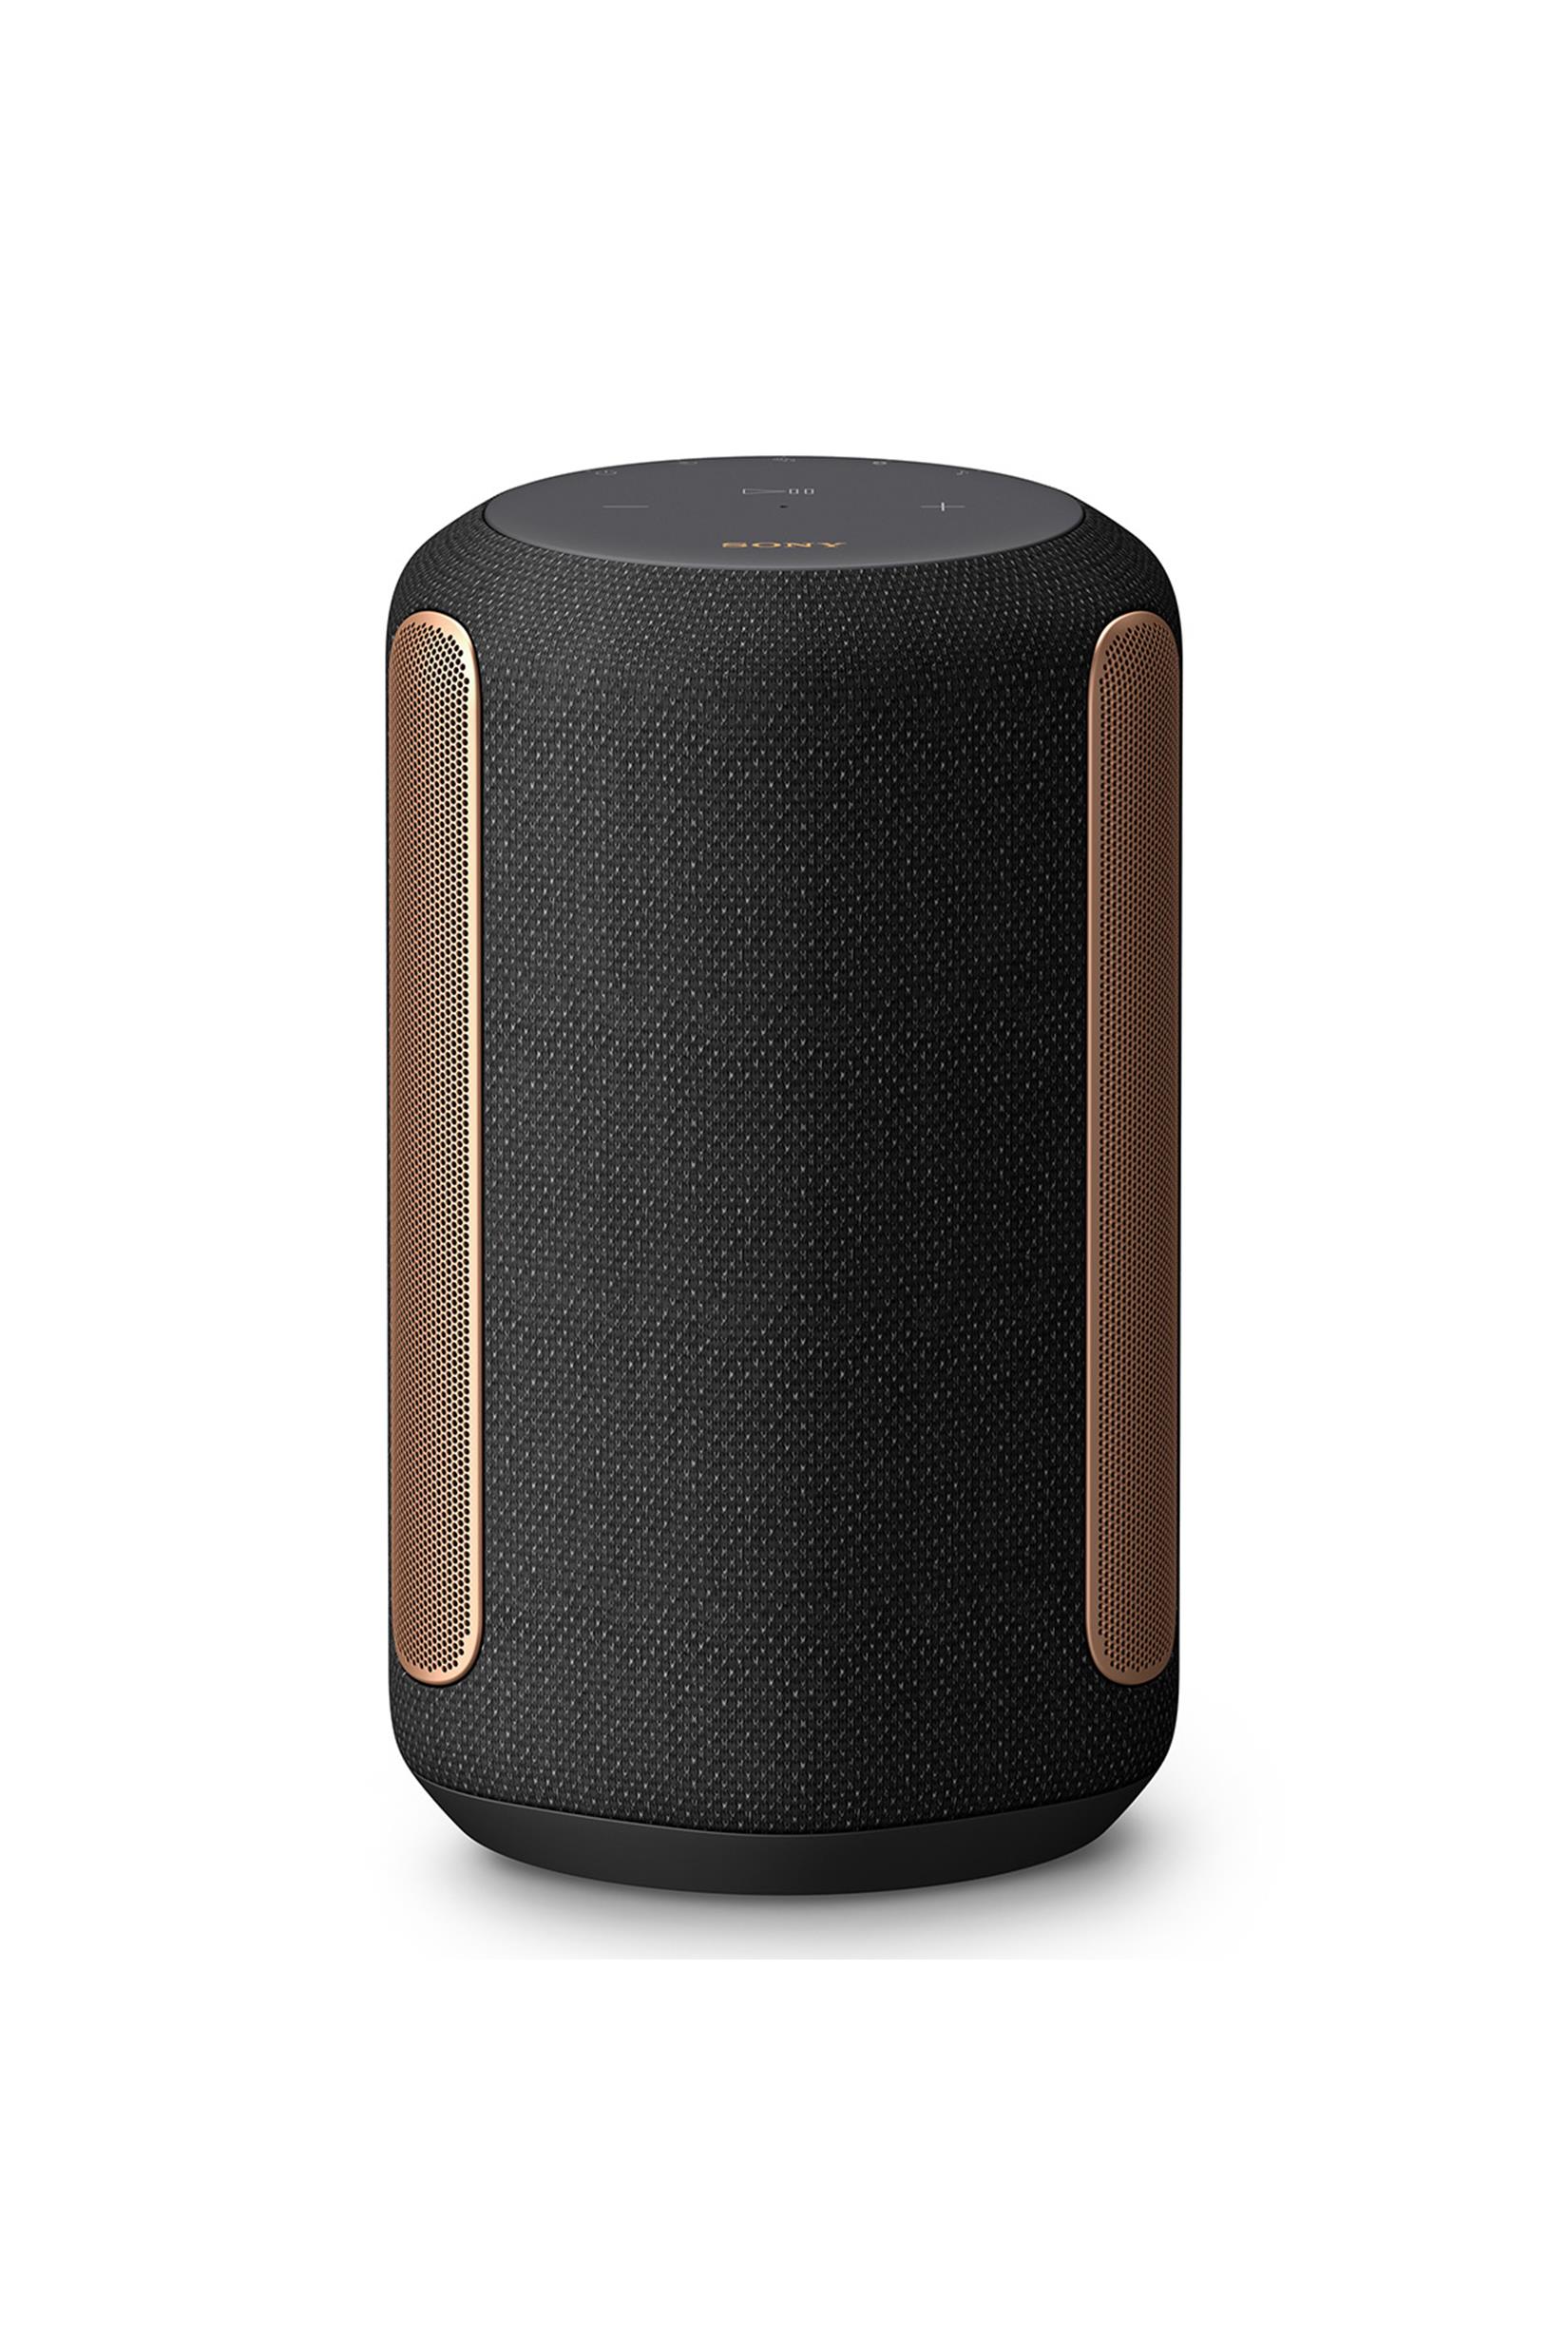 Sony SRS-RA3000 360 Reality Audio Wireless Speaker with Wi-Fi and Bluetooth (Black) - image 2 of 4